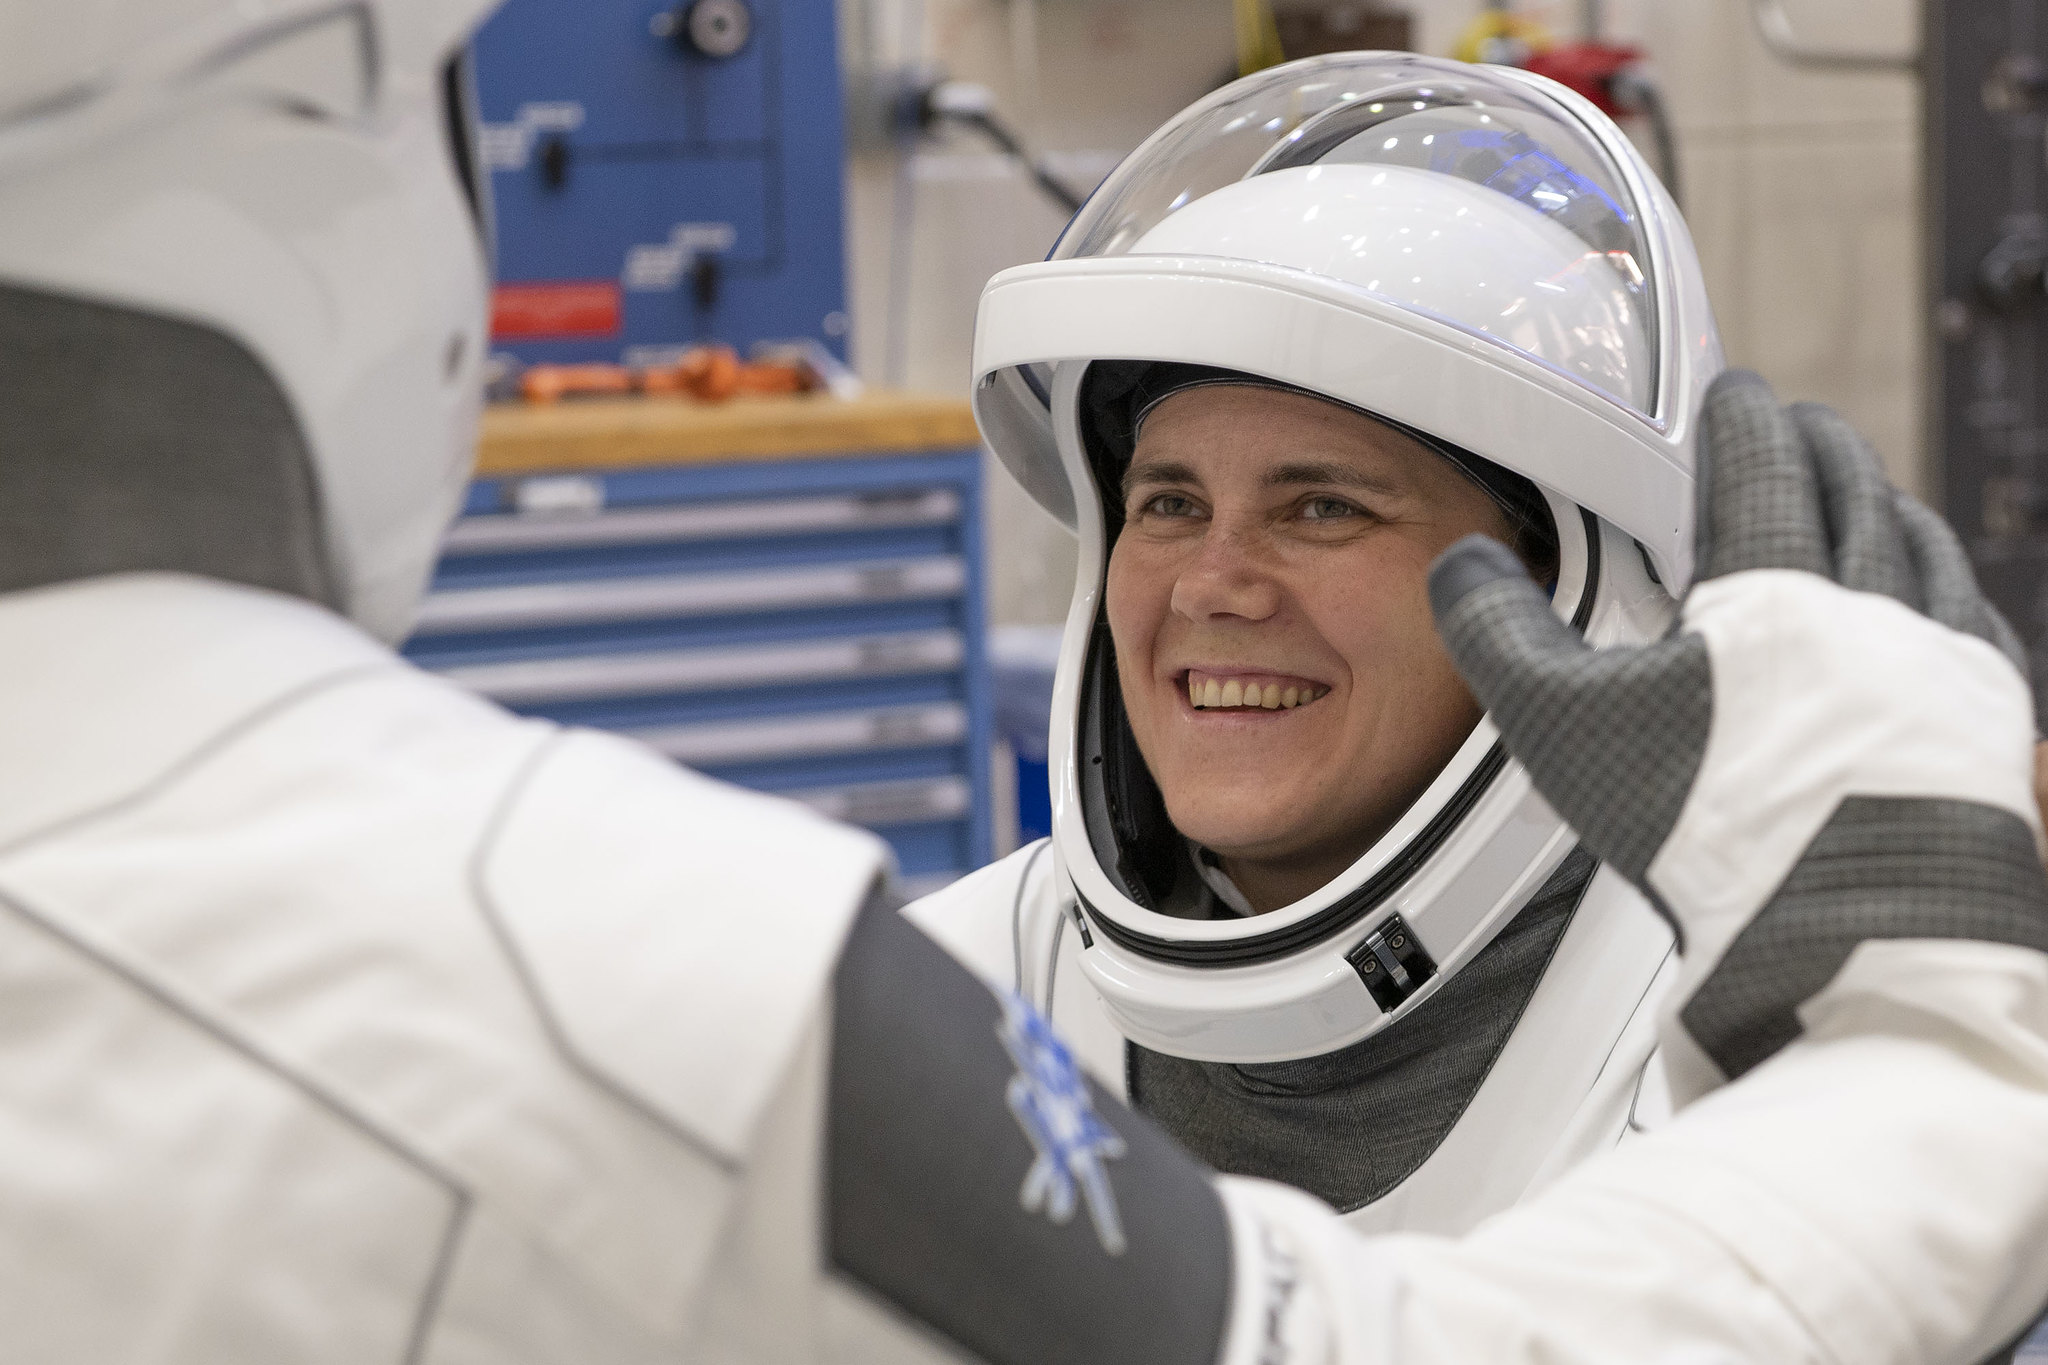 anna kikina in a spacesuit smiling with another astronaut in front (only visible in the back) raising his hand